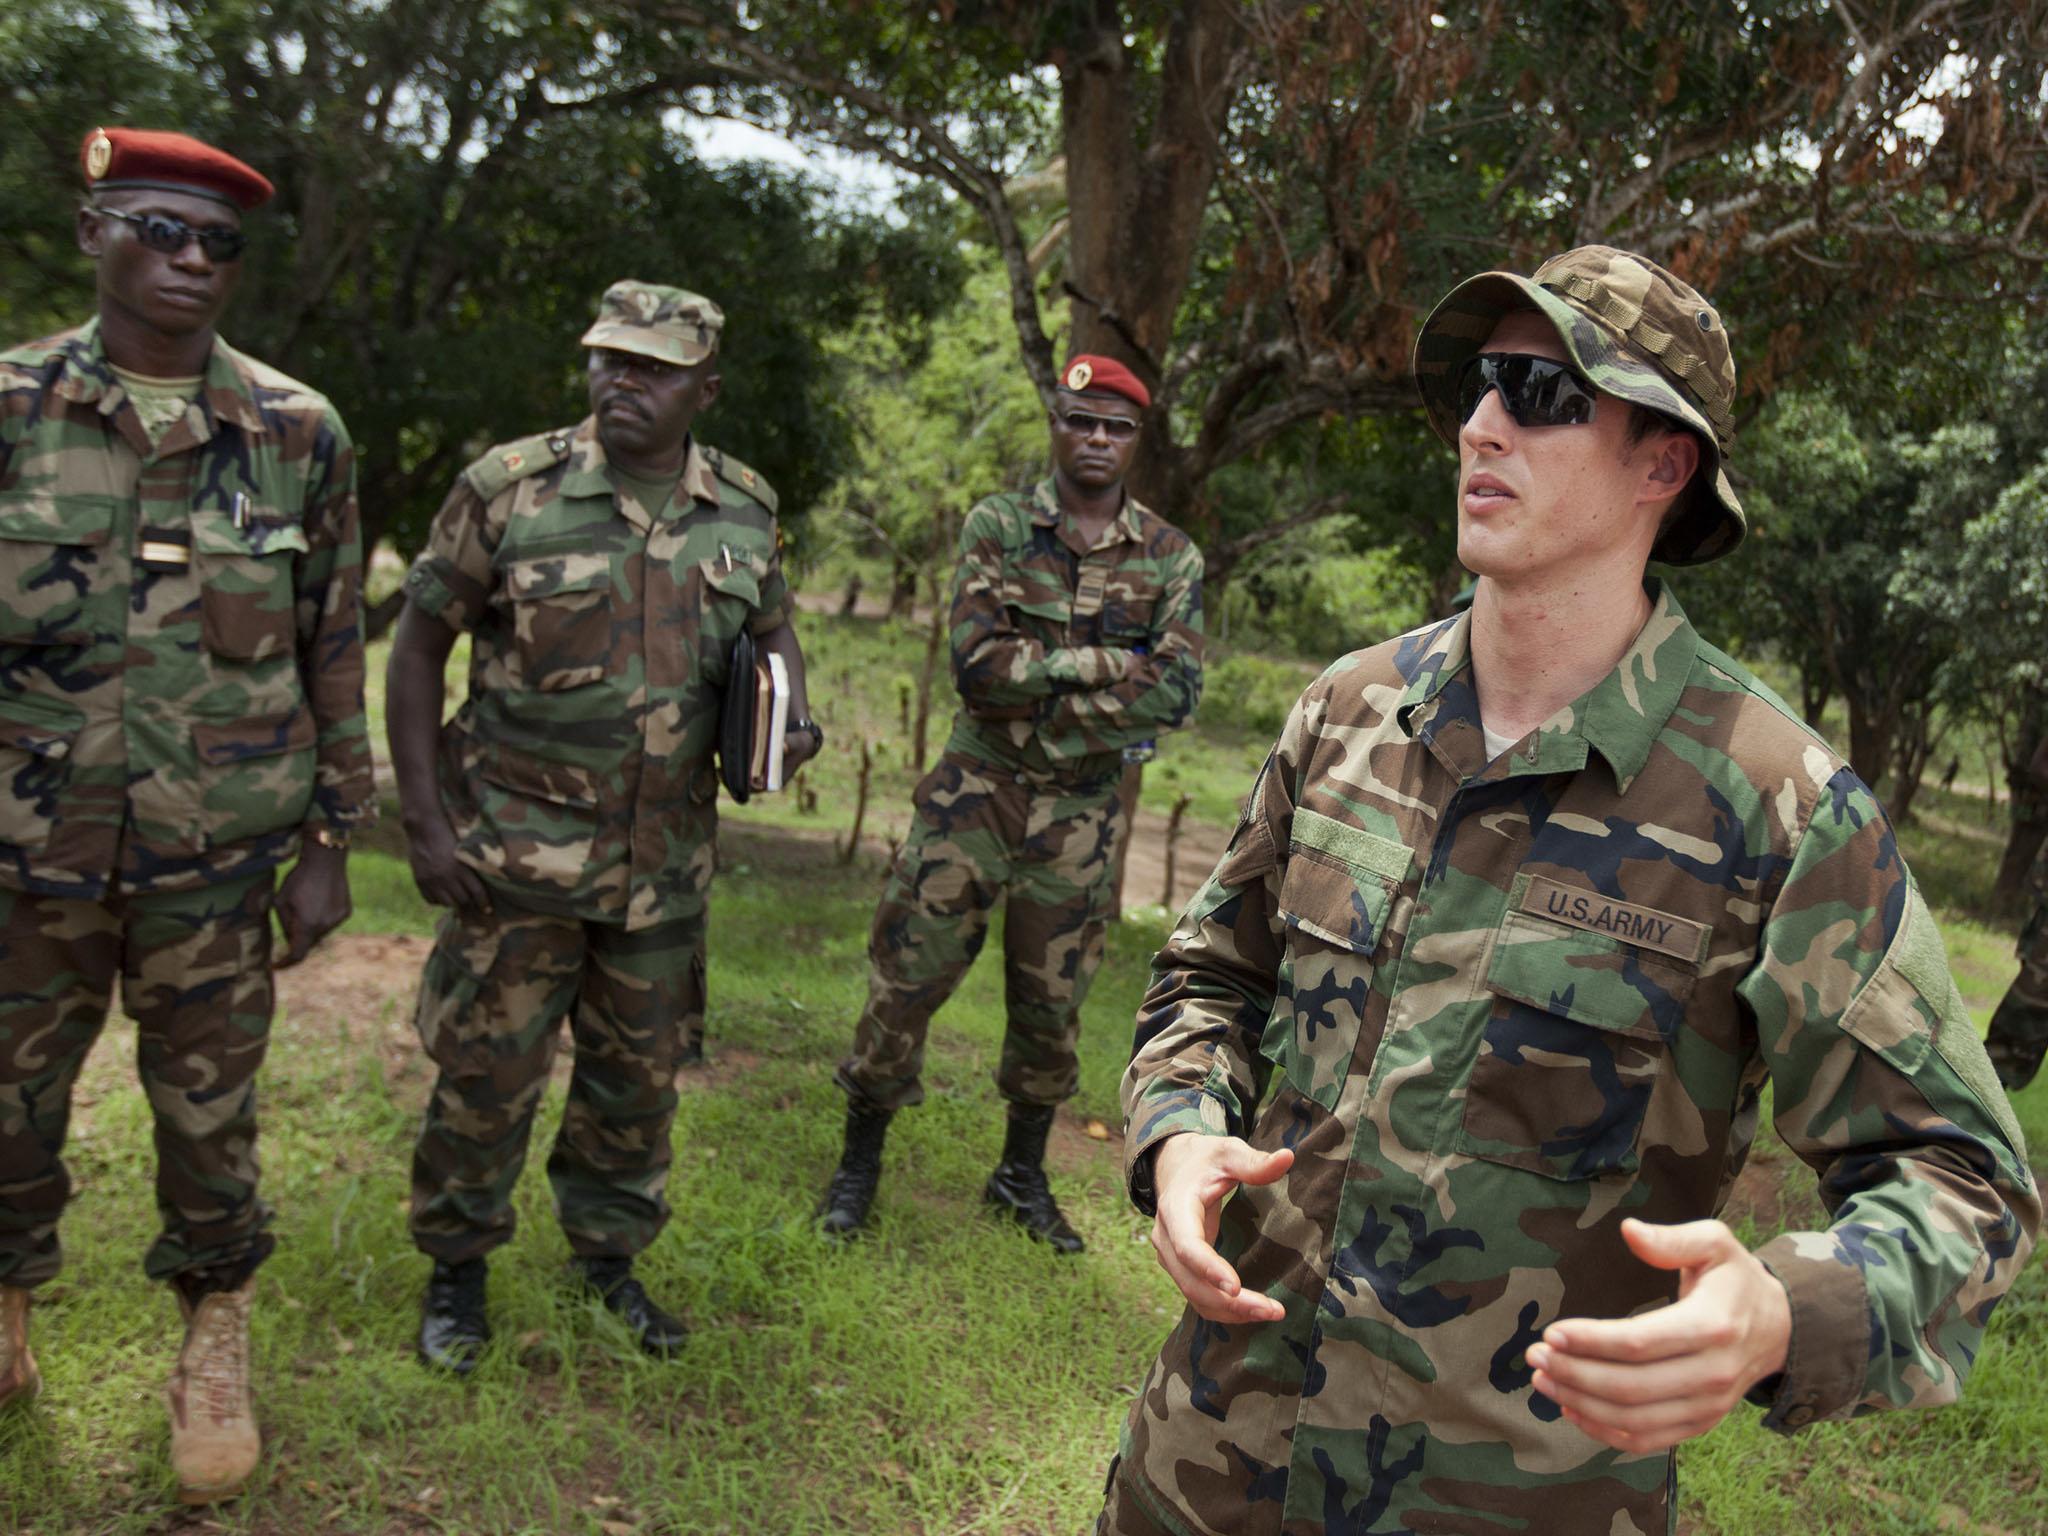 US Army Captain Gregory, 29, from Texas, right, speaks with troops from the Central African Republic and Uganda